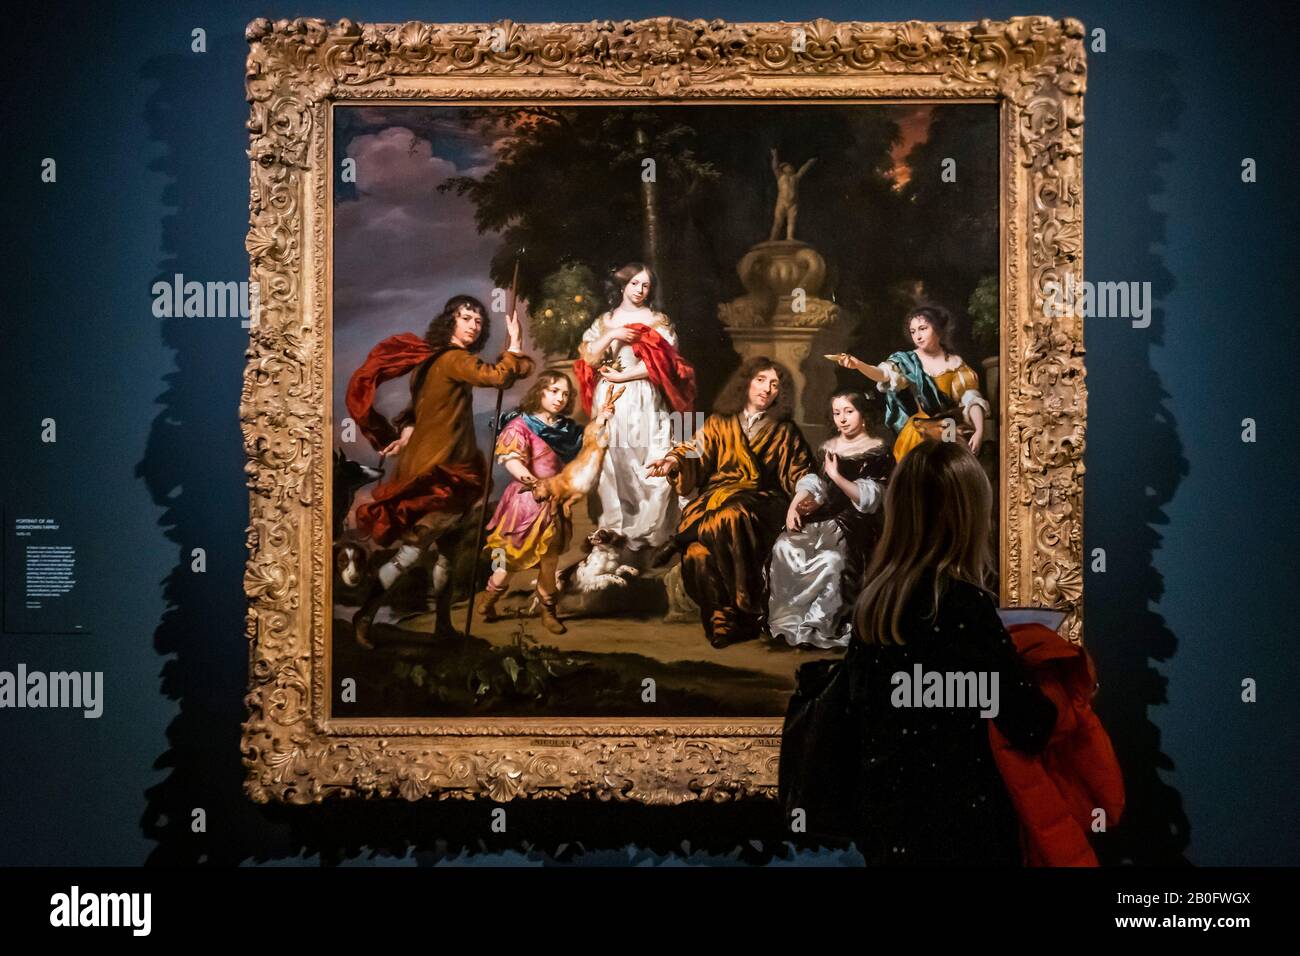 London, UK. 20 Feb, 2020. Portrit of an Unknown Family, 1670-75 - Nicolaes Maes: Dutch Master of the Golden Age a new exhibition at the National Gallery. Credit: Guy Bell/Alamy Live News Stock Photo